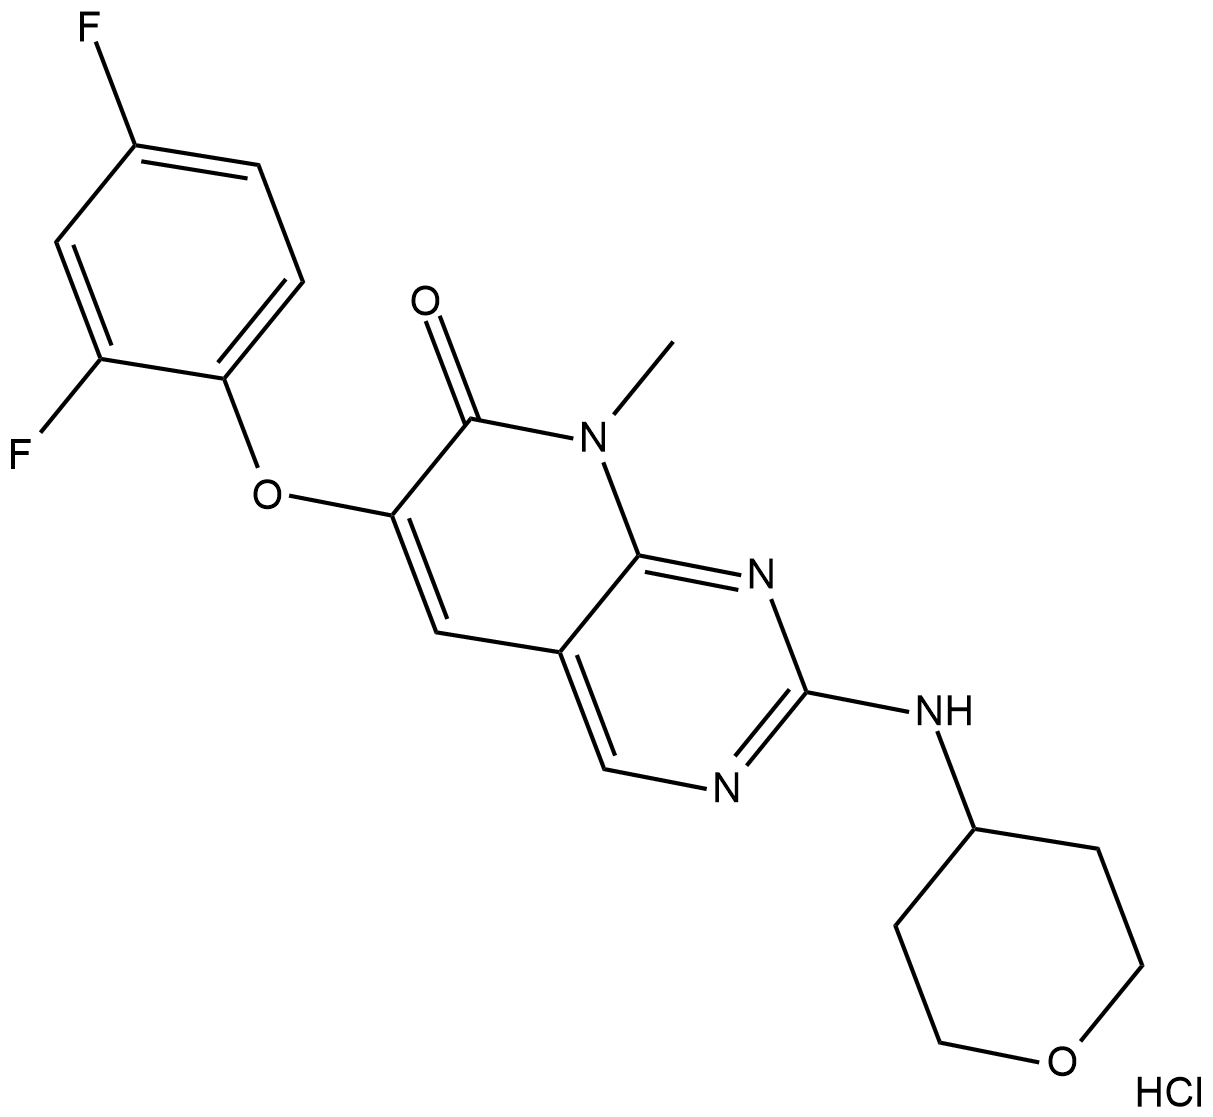 R1487 Hydrochloride  Chemical Structure